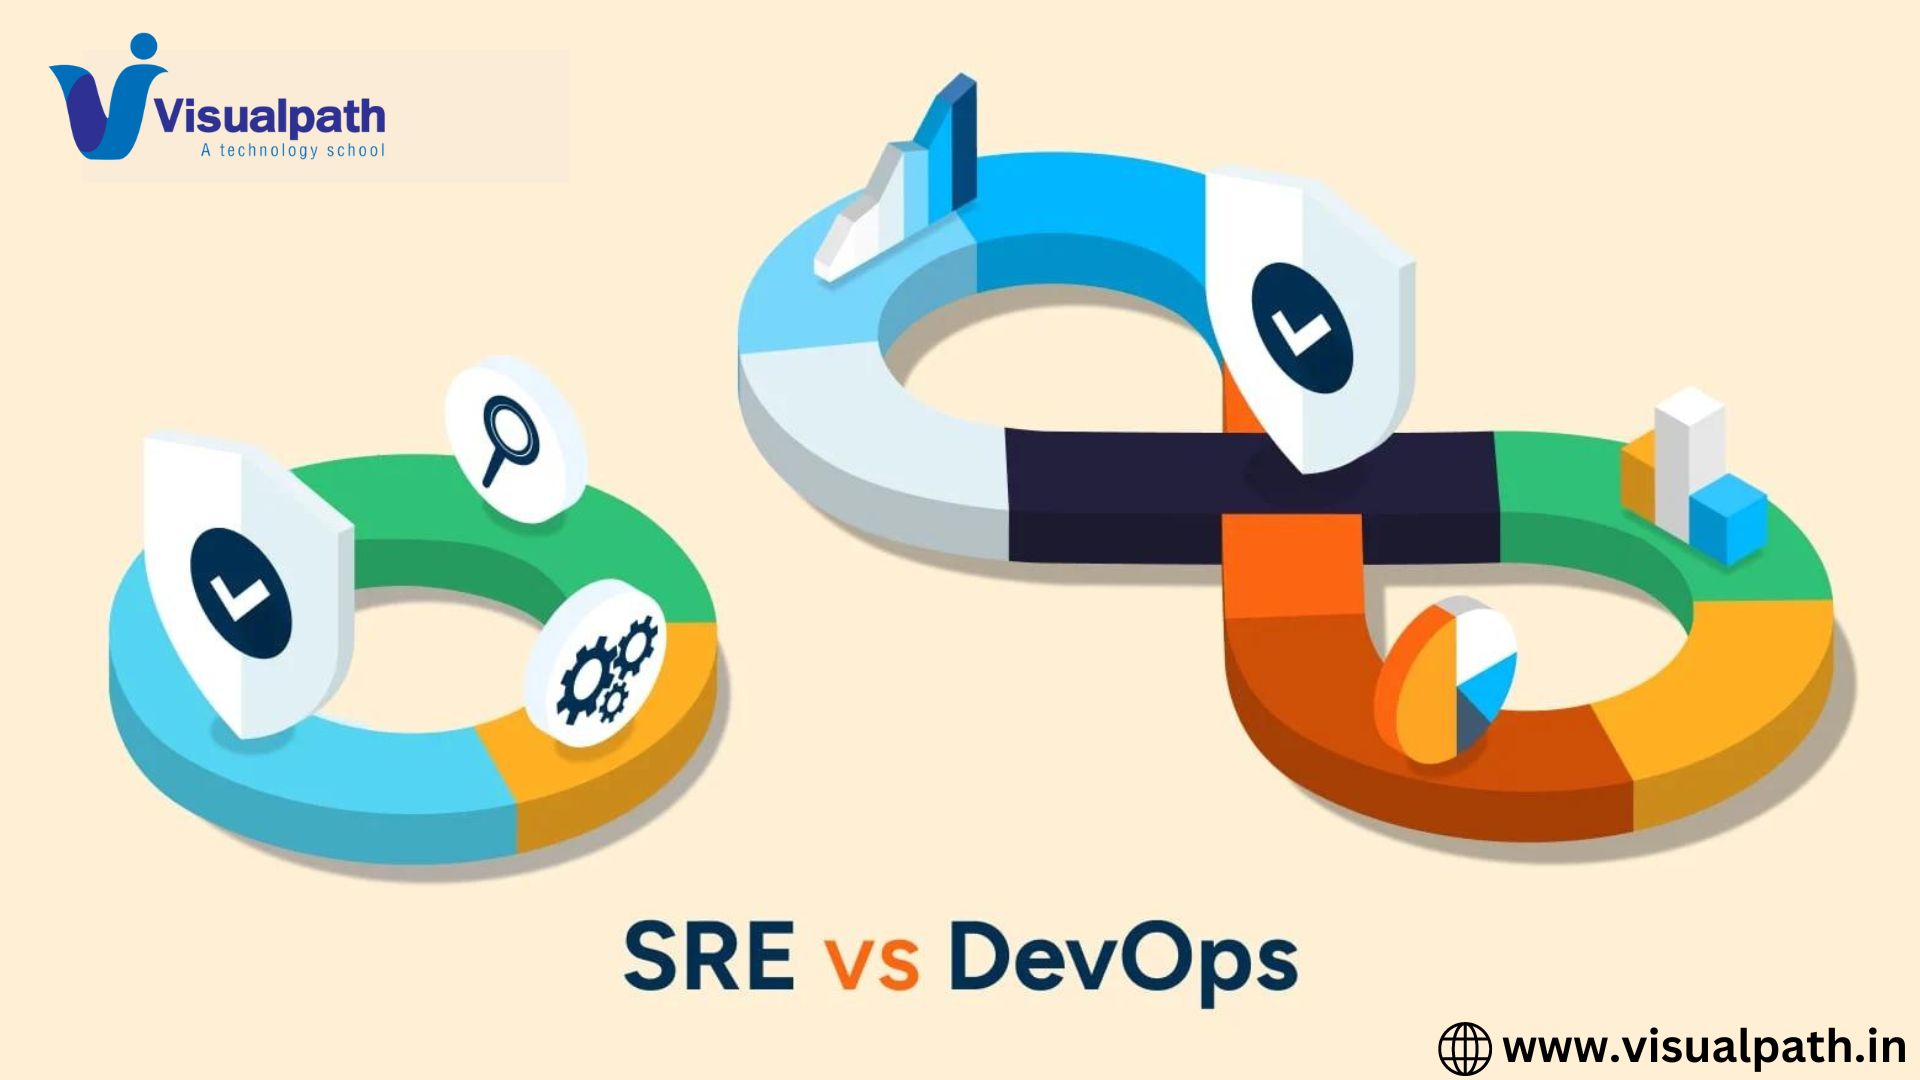 What are SRE and DevOps, and why do you need both?